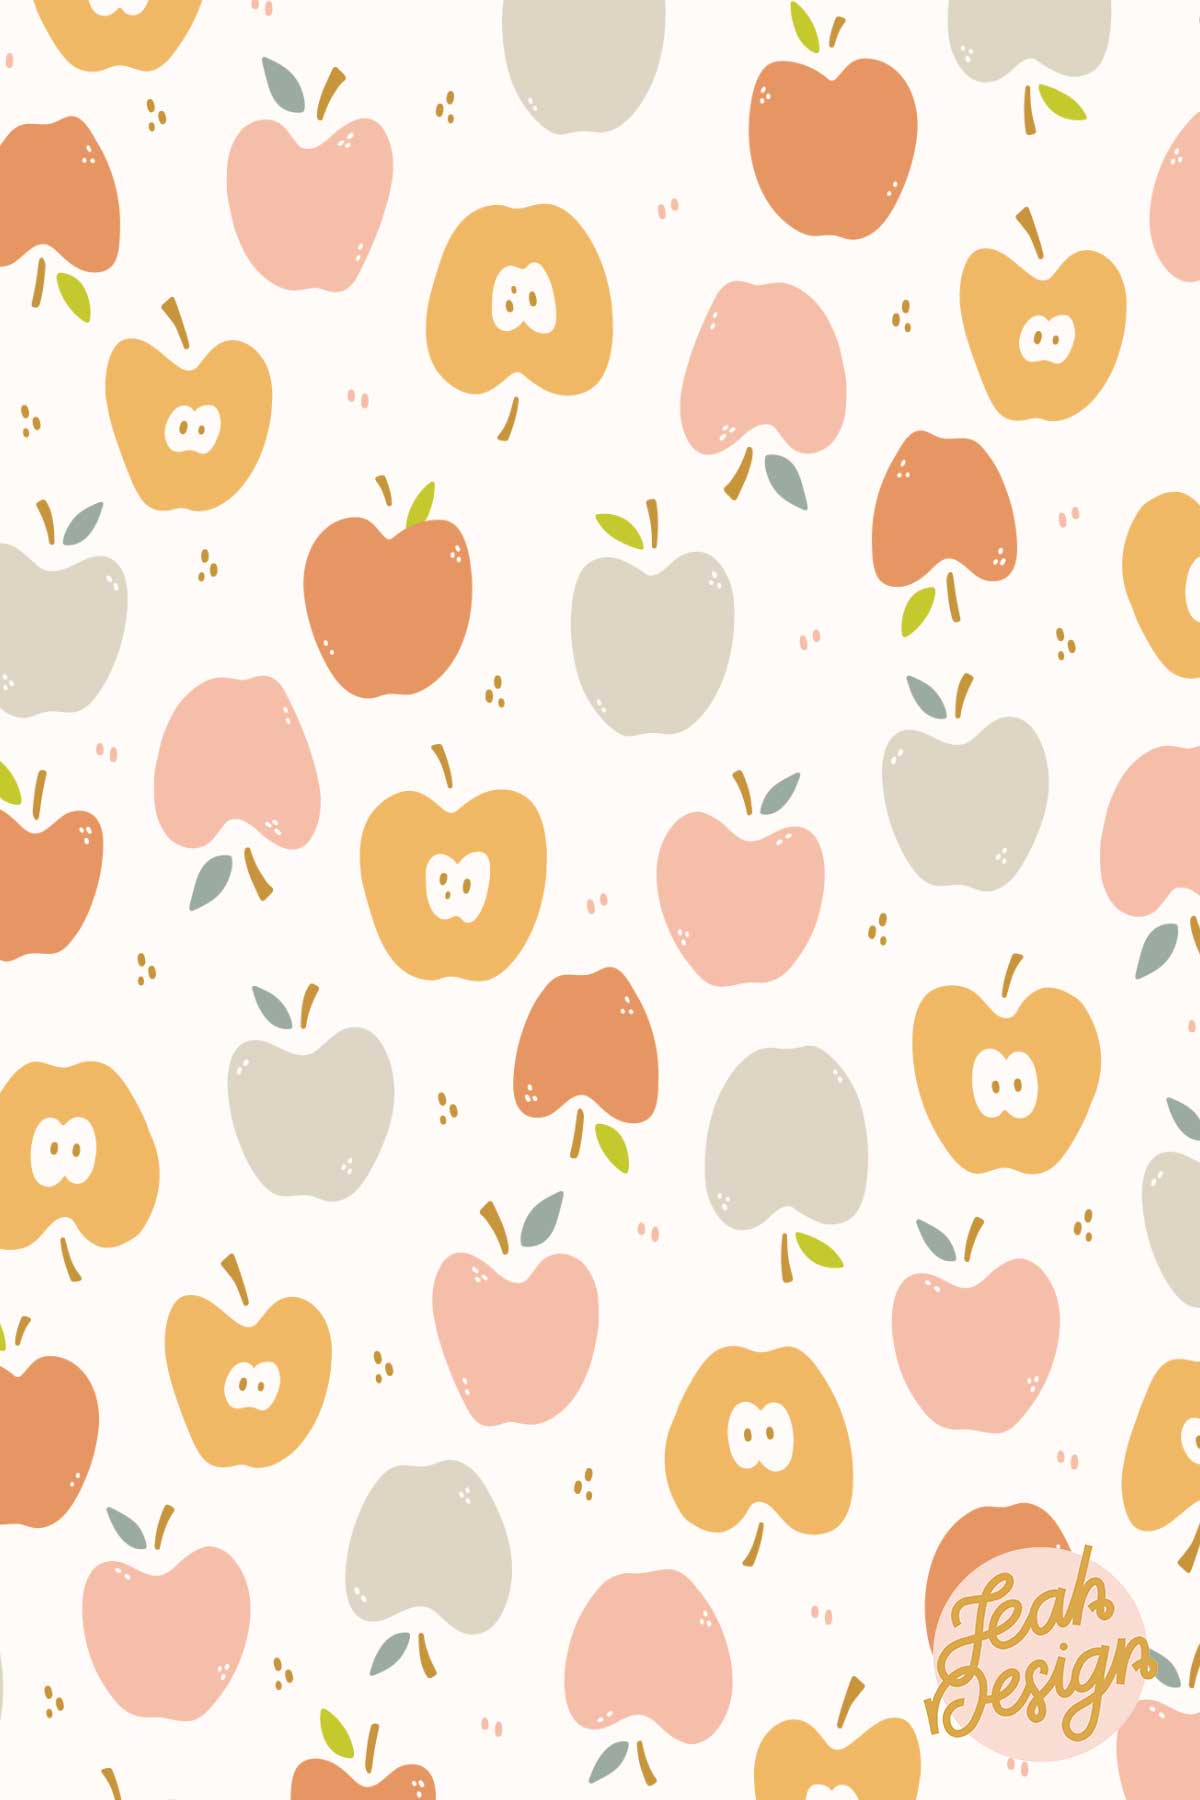 Digitally hand-drawn flat apples and apple halves in a two-way repeat pattern. Motifs are created in apricot crush, chalk, mellow peach and ochre yellow colours on a cream white background.